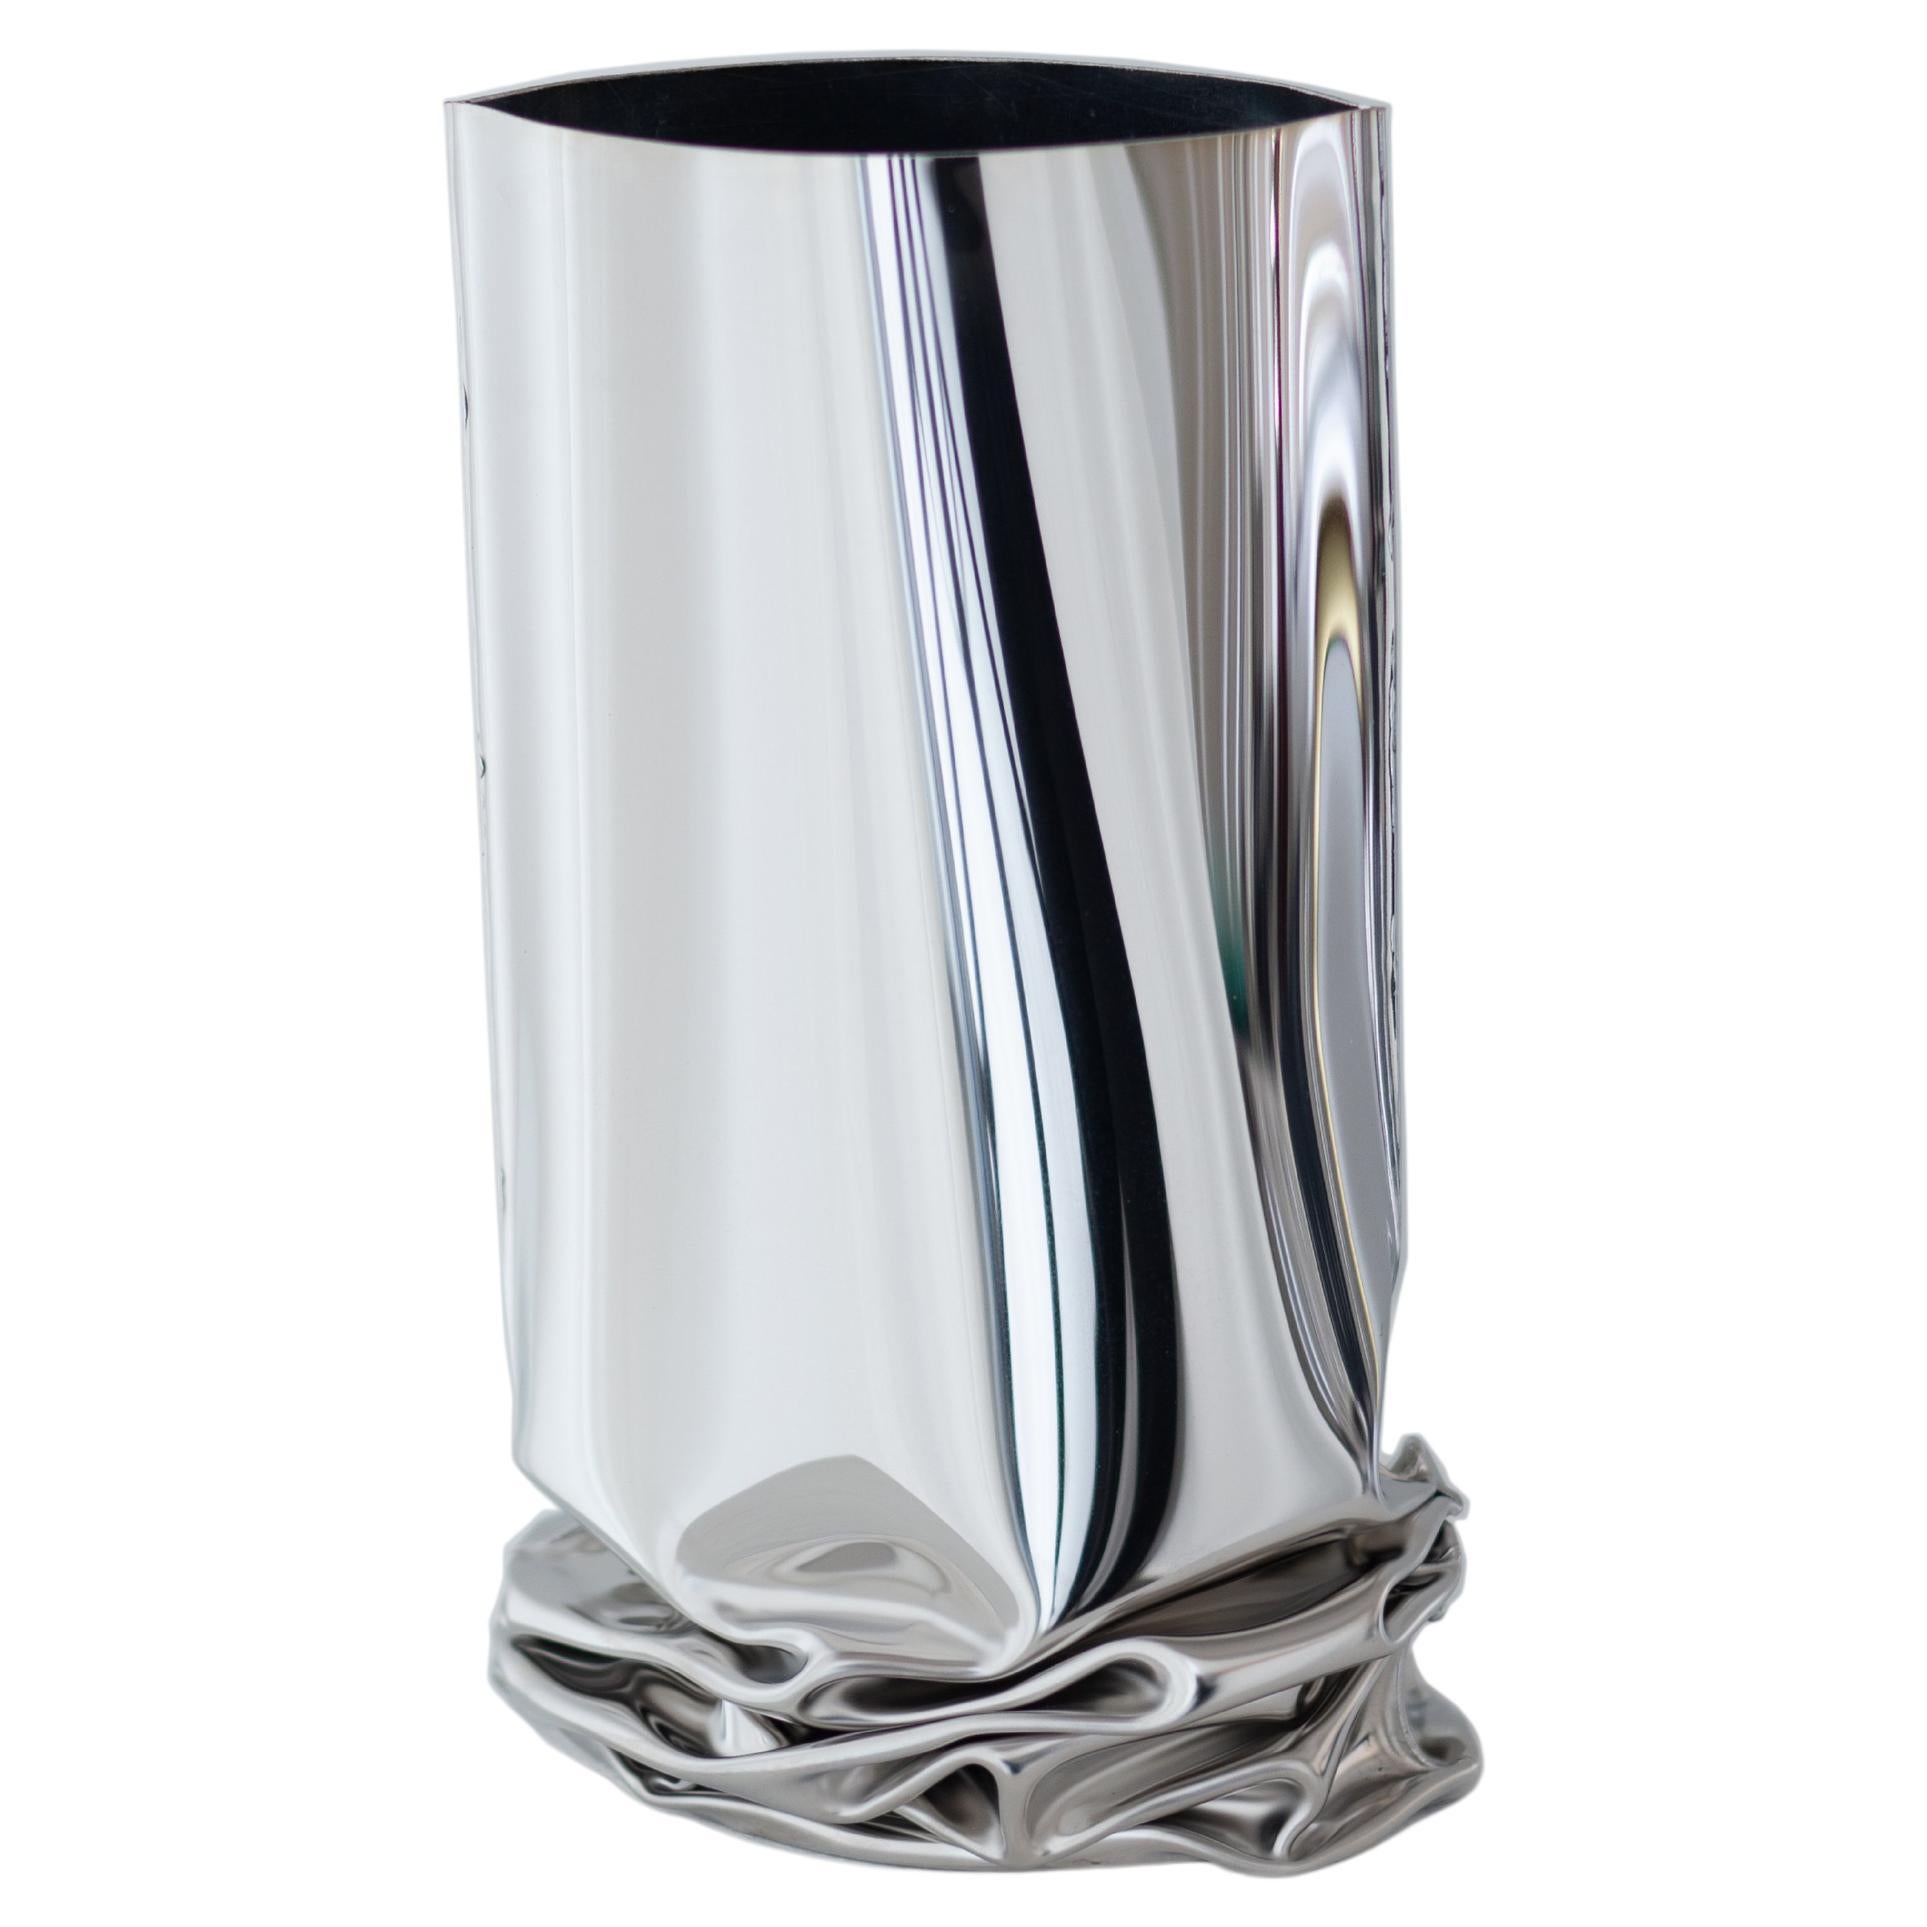 Contemporary Vase, 'Crash Vase' by Zieta, Small, Stainless Steel For Sale